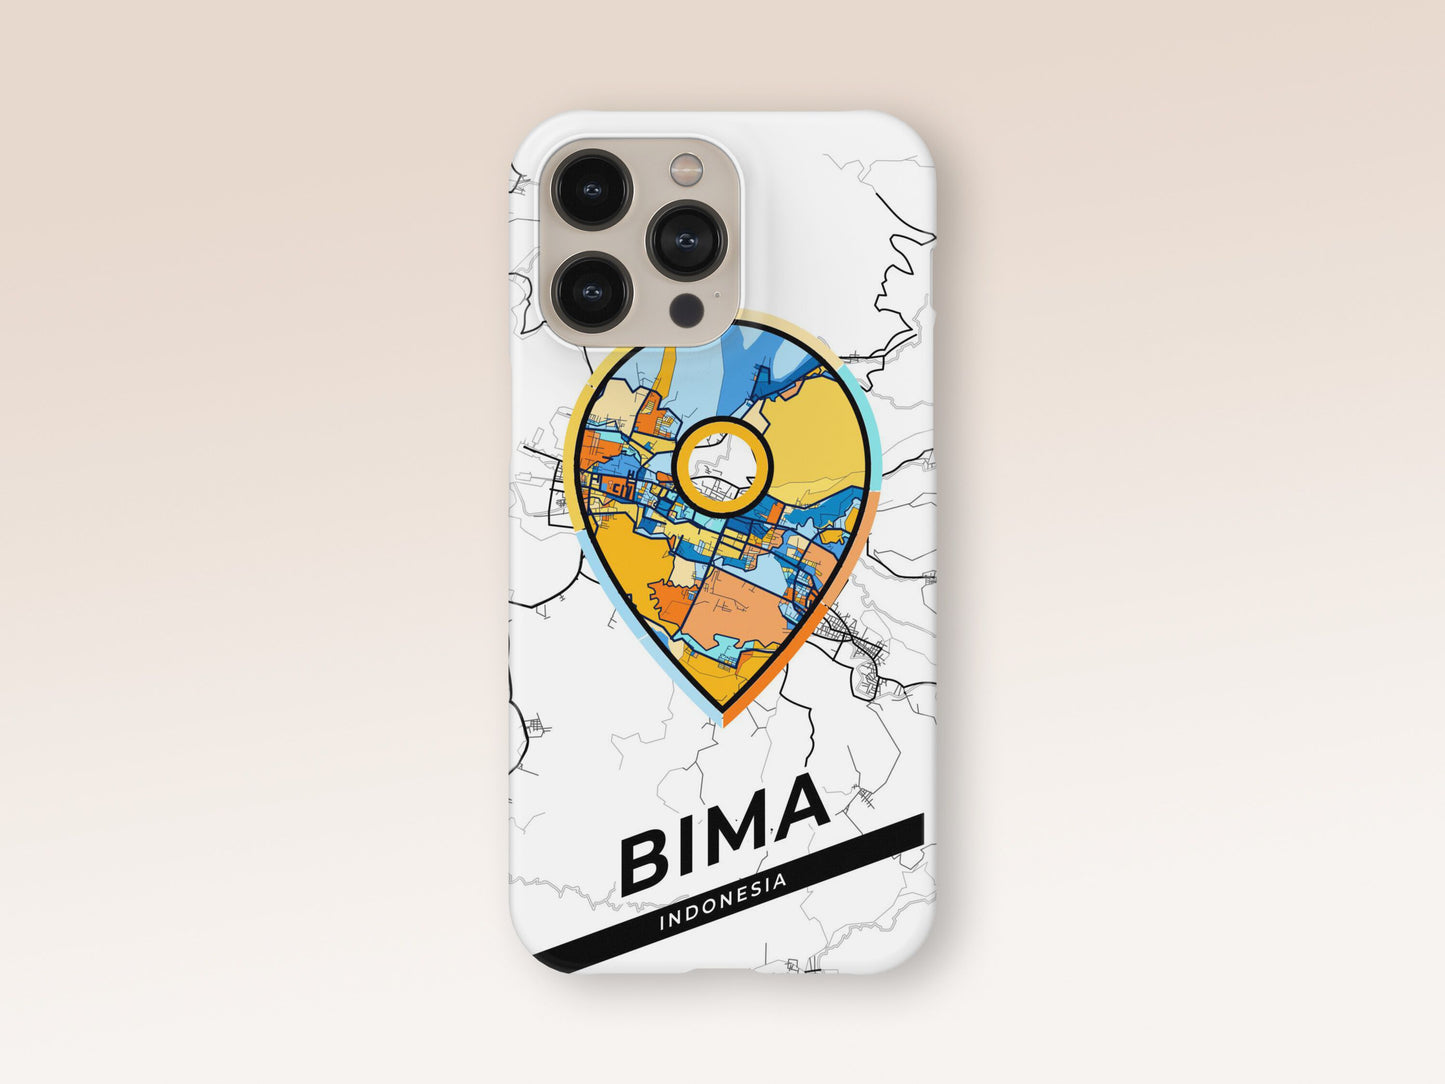 Bima Indonesia slim phone case with colorful icon. Birthday, wedding or housewarming gift. Couple match cases. 1